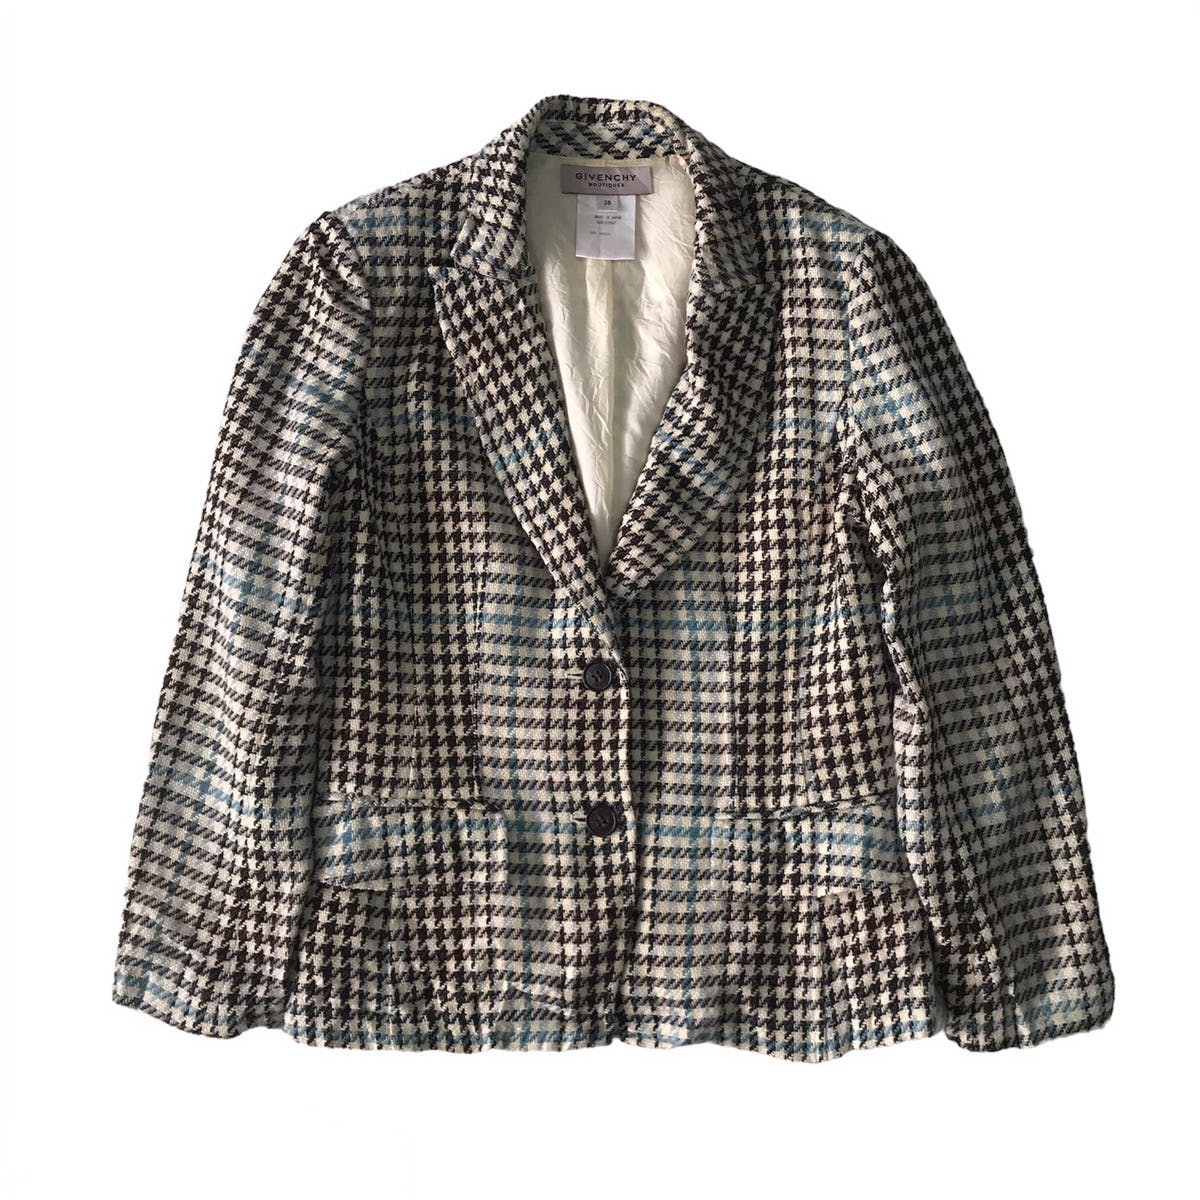 Givenchy Boutiques Wool Jacket Coat - 1